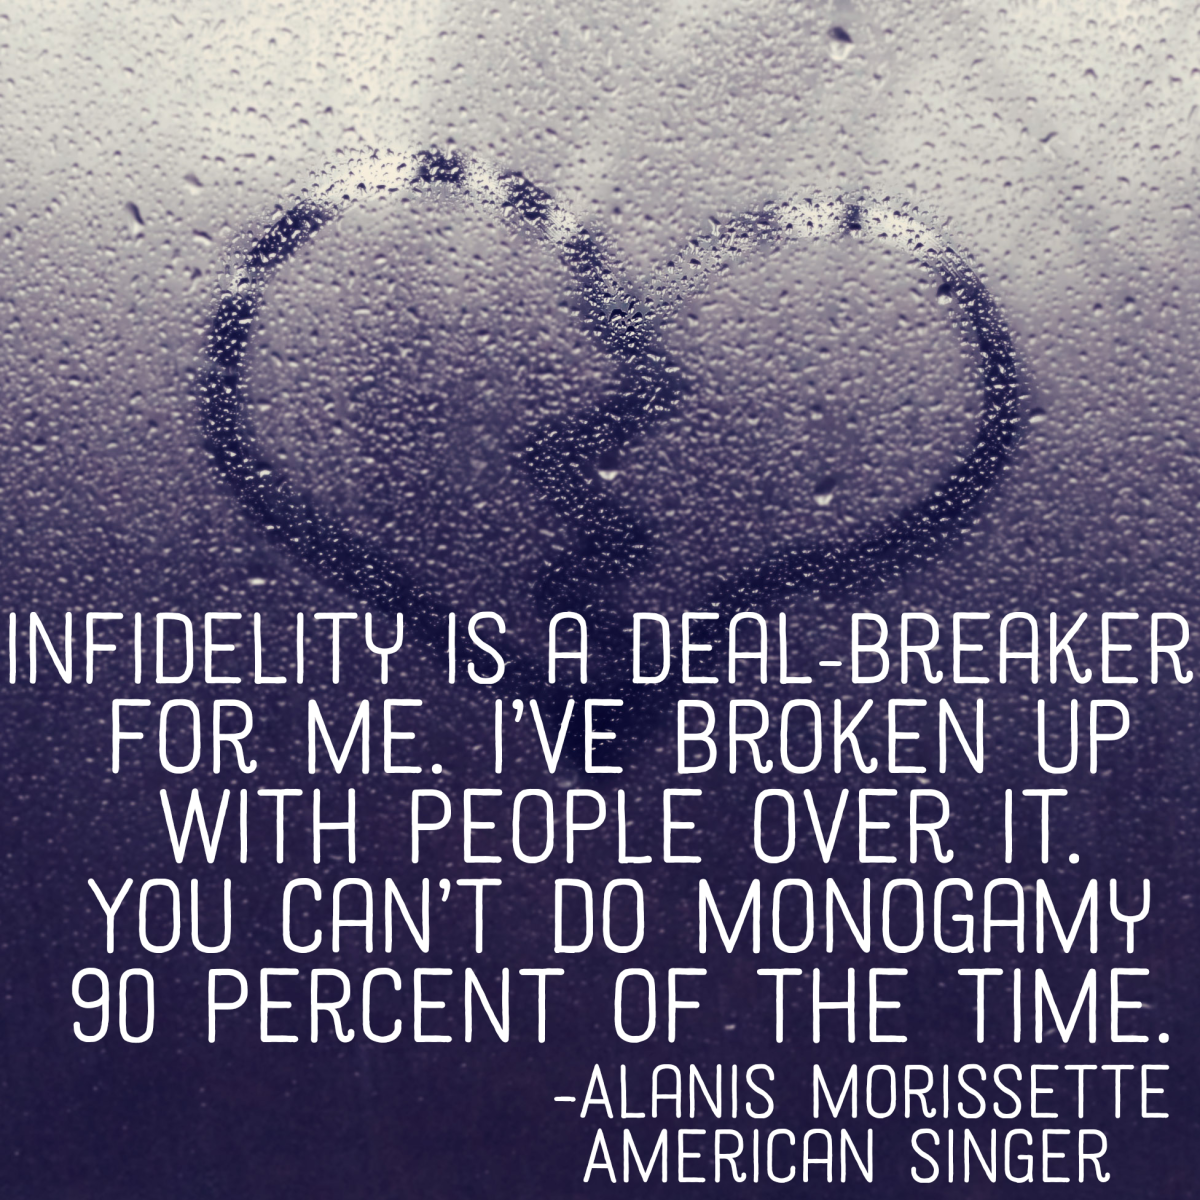 "Infidelity is a deal-breaker for me. I've broken up with people over it. You can't do monogamy 90 percent of the time." - Alanis Morissette, American singer